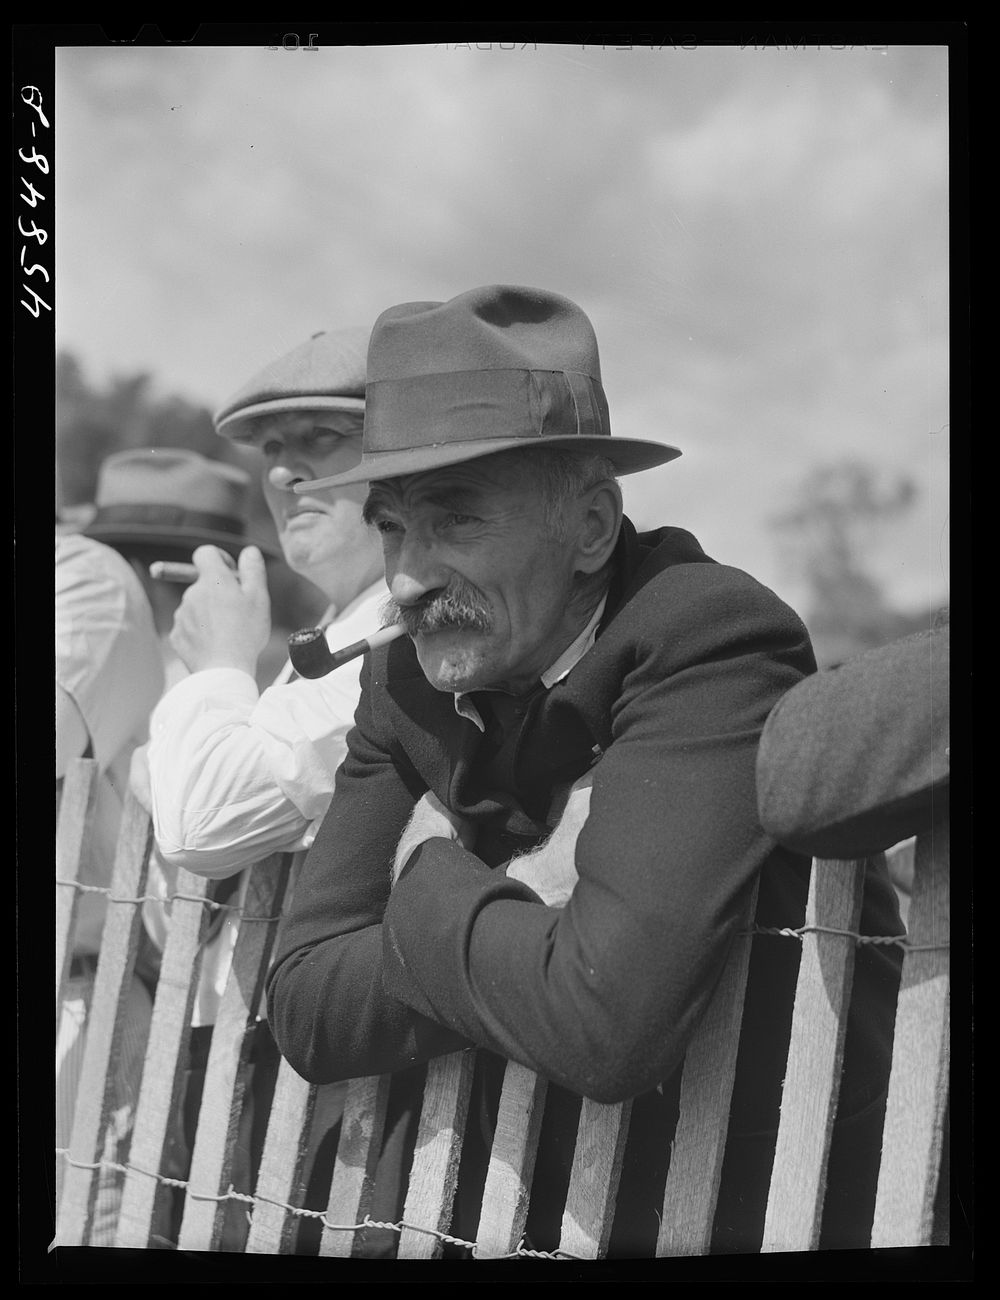 Spectator at the parade. World's Fair in Tunbridge, Vermont. Sourced from the Library of Congress.